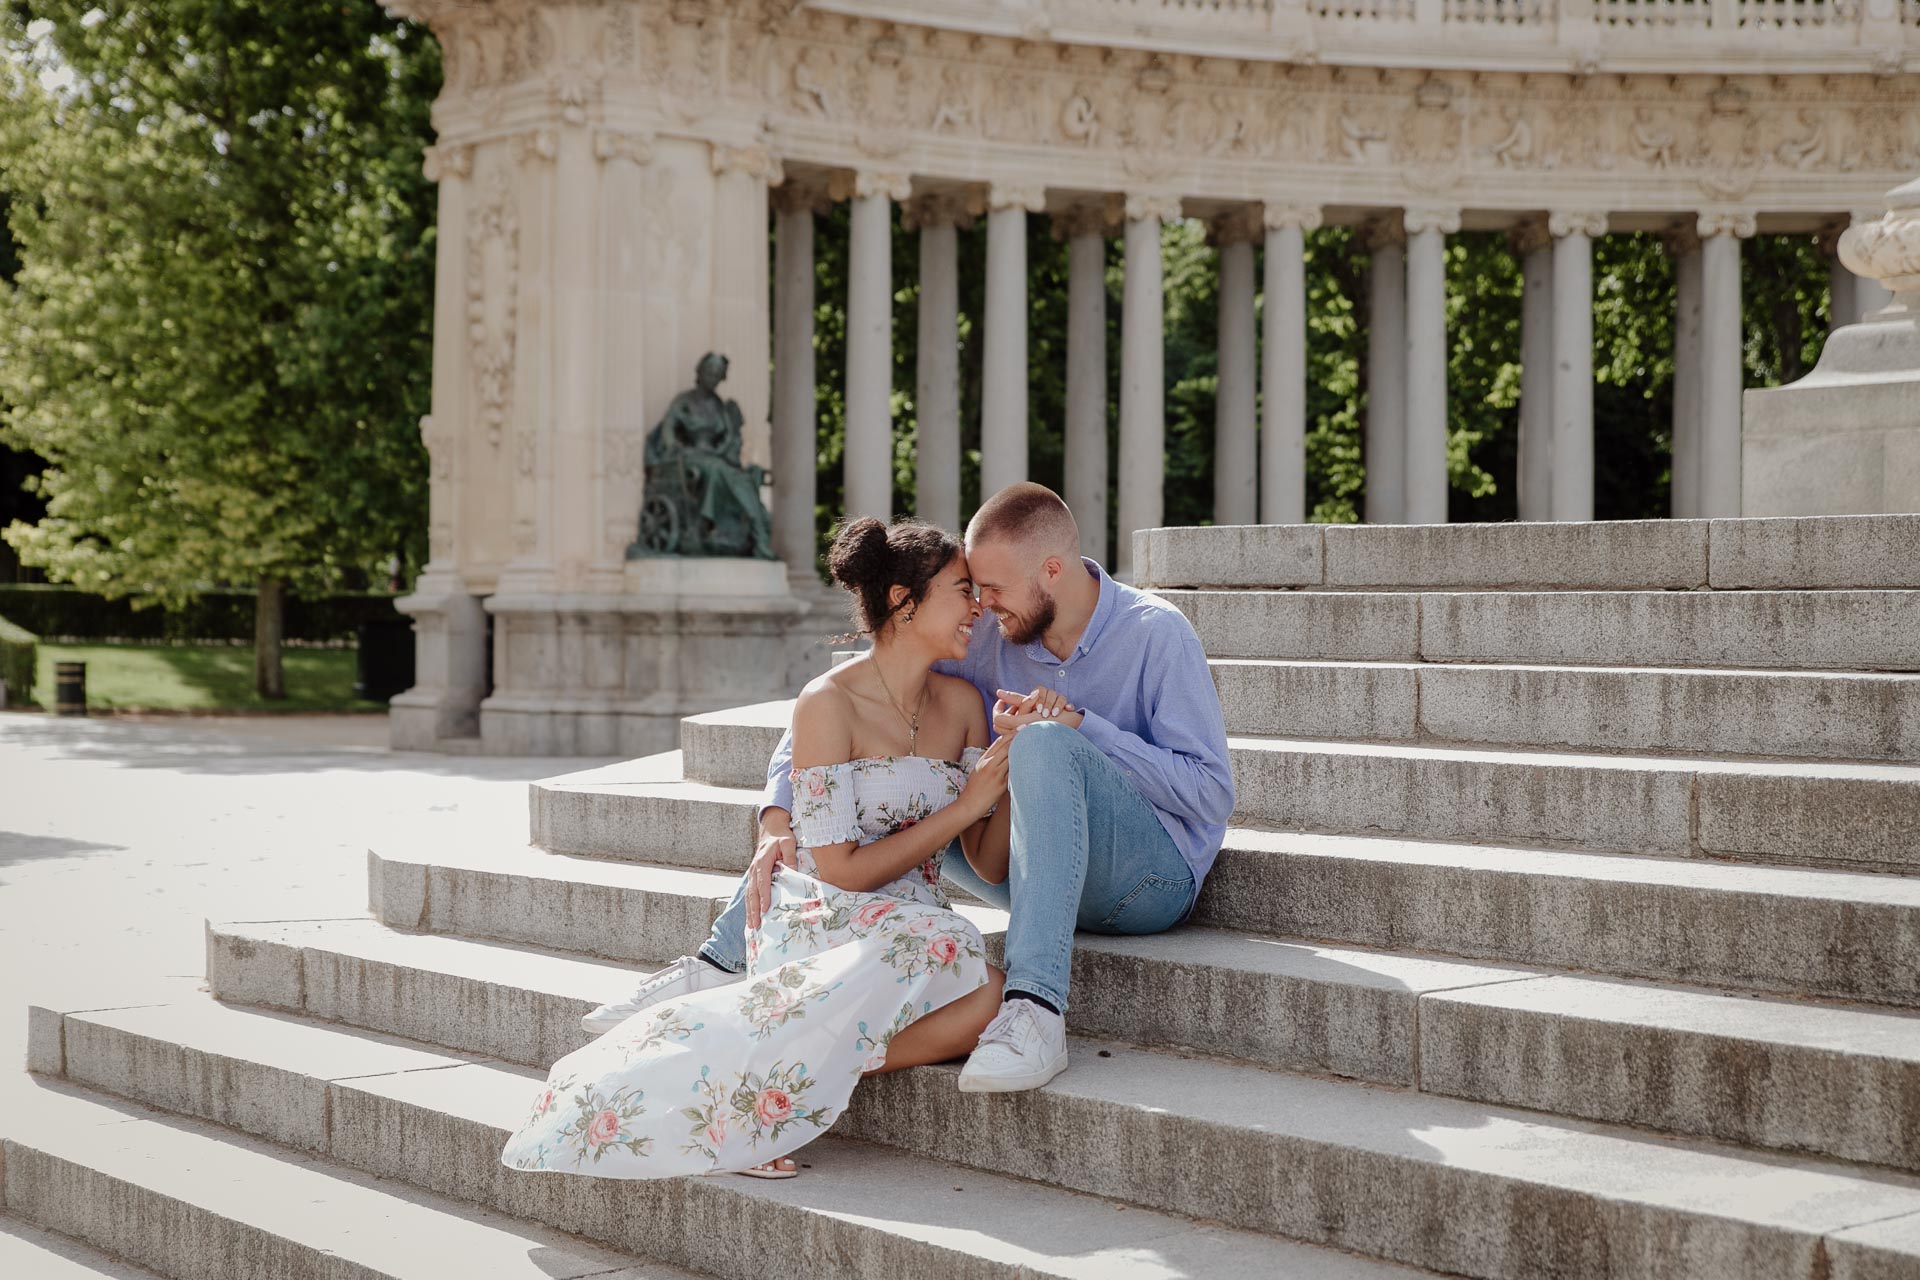 marriage proposal photography at retiro park in madrid